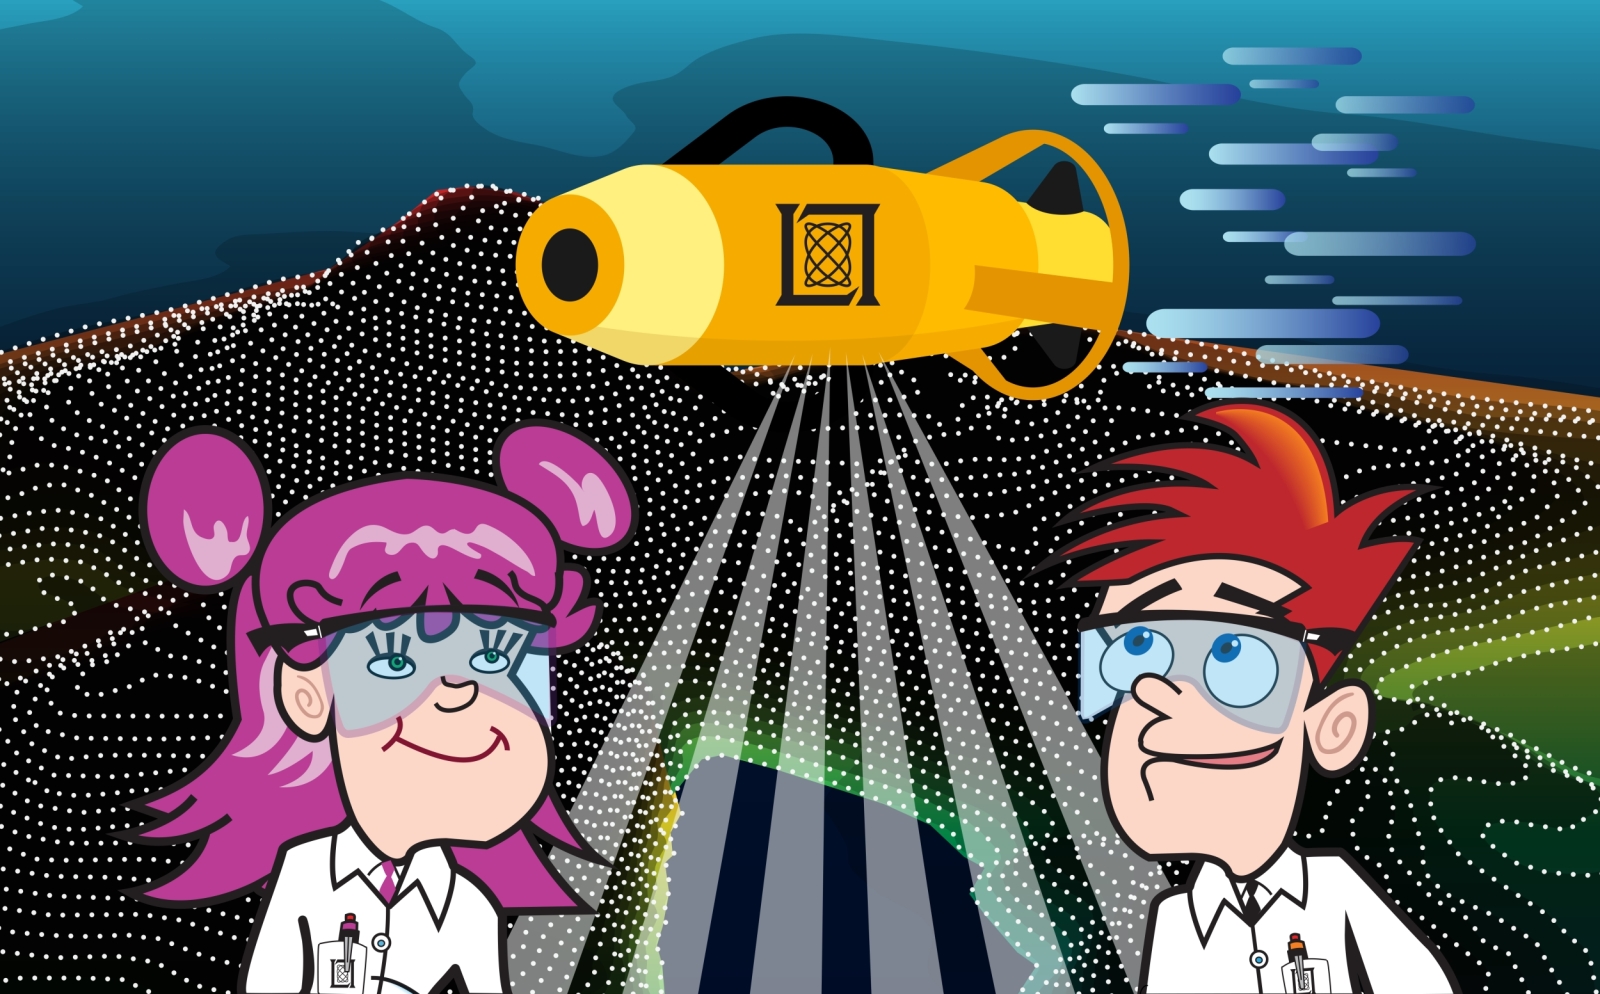 an illustration of two scientists underwater, looking up at a small yellow submarine with the MIT LL logo on it.